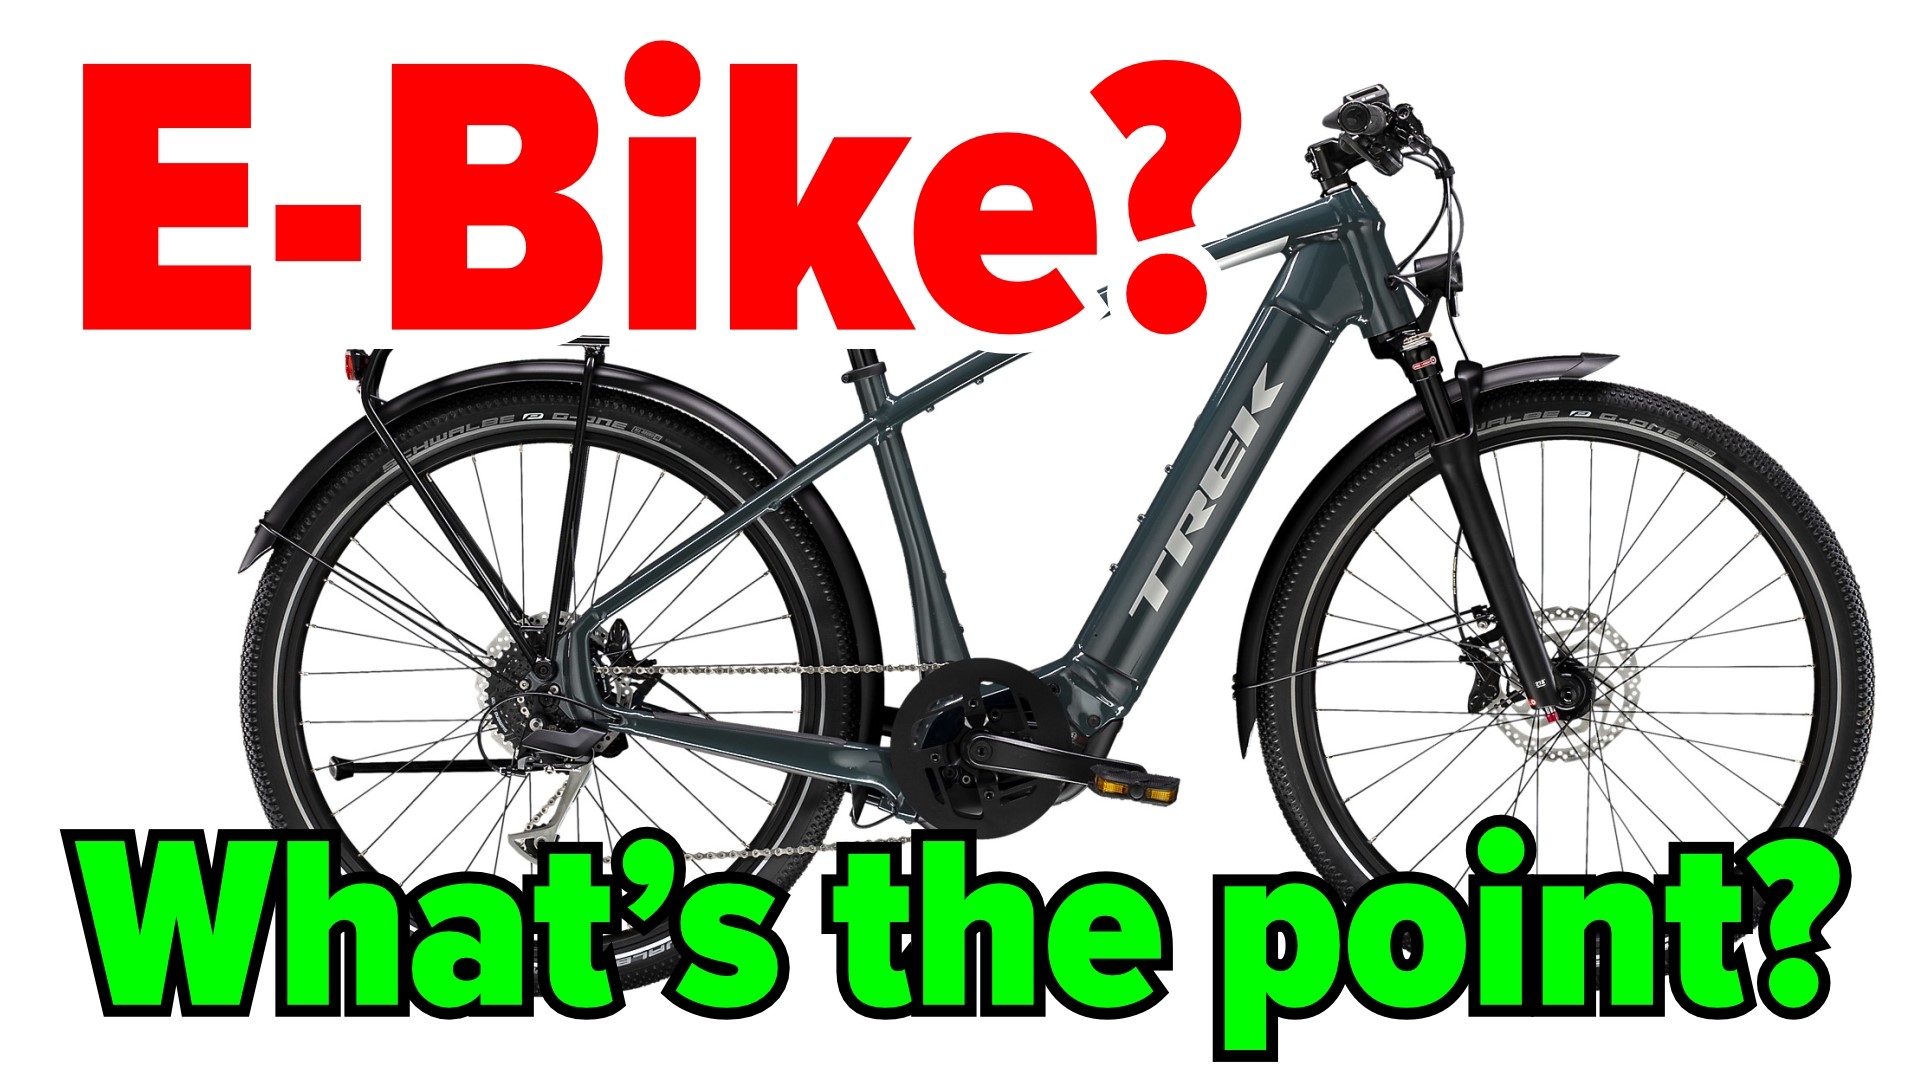 Learn more about the various bikes and e-bikes this local shop has!